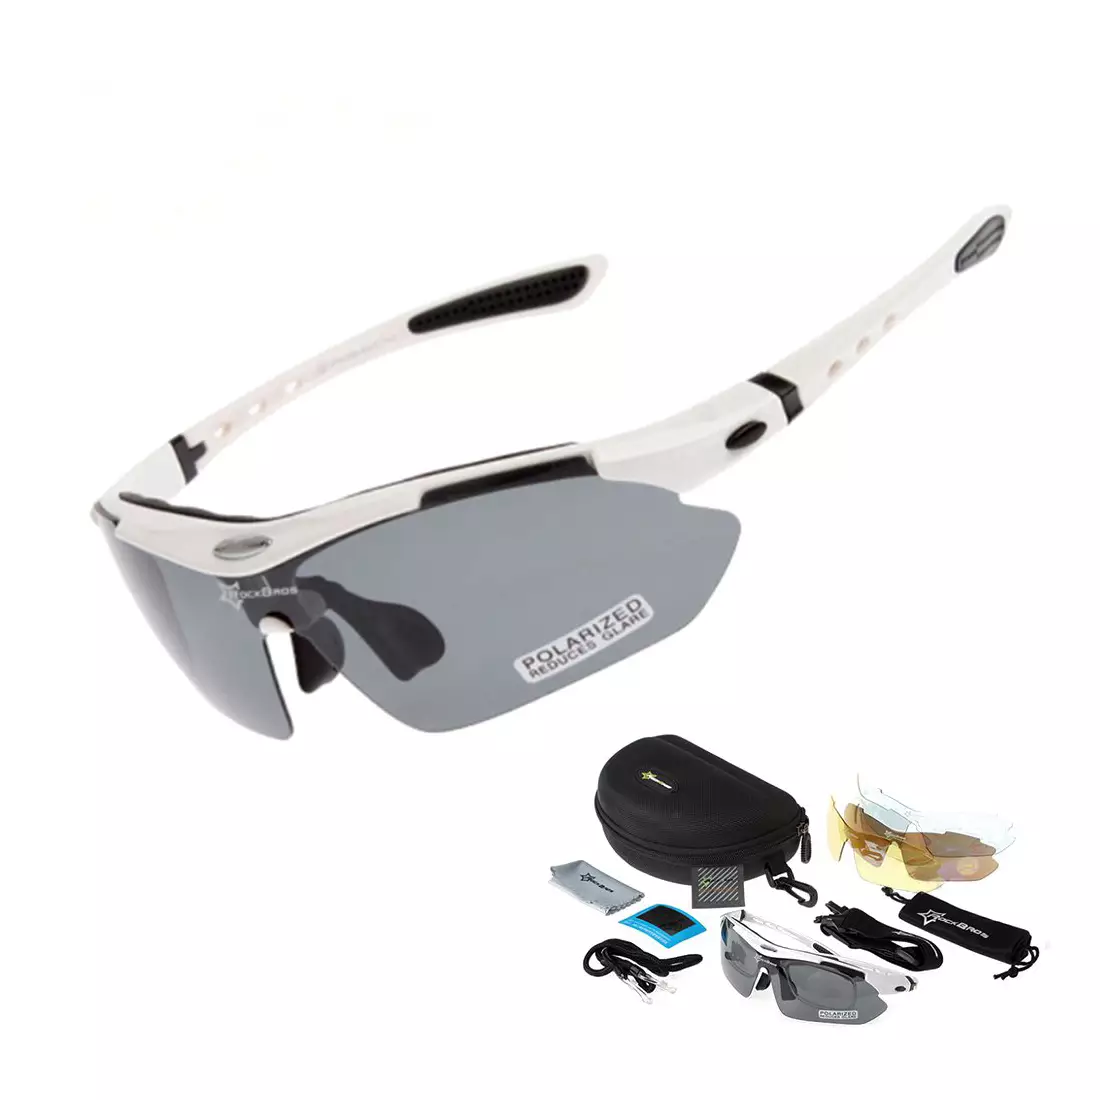 RockBros 10002 bicycle / sports goggles with polarized 5 interchangeable lenses white